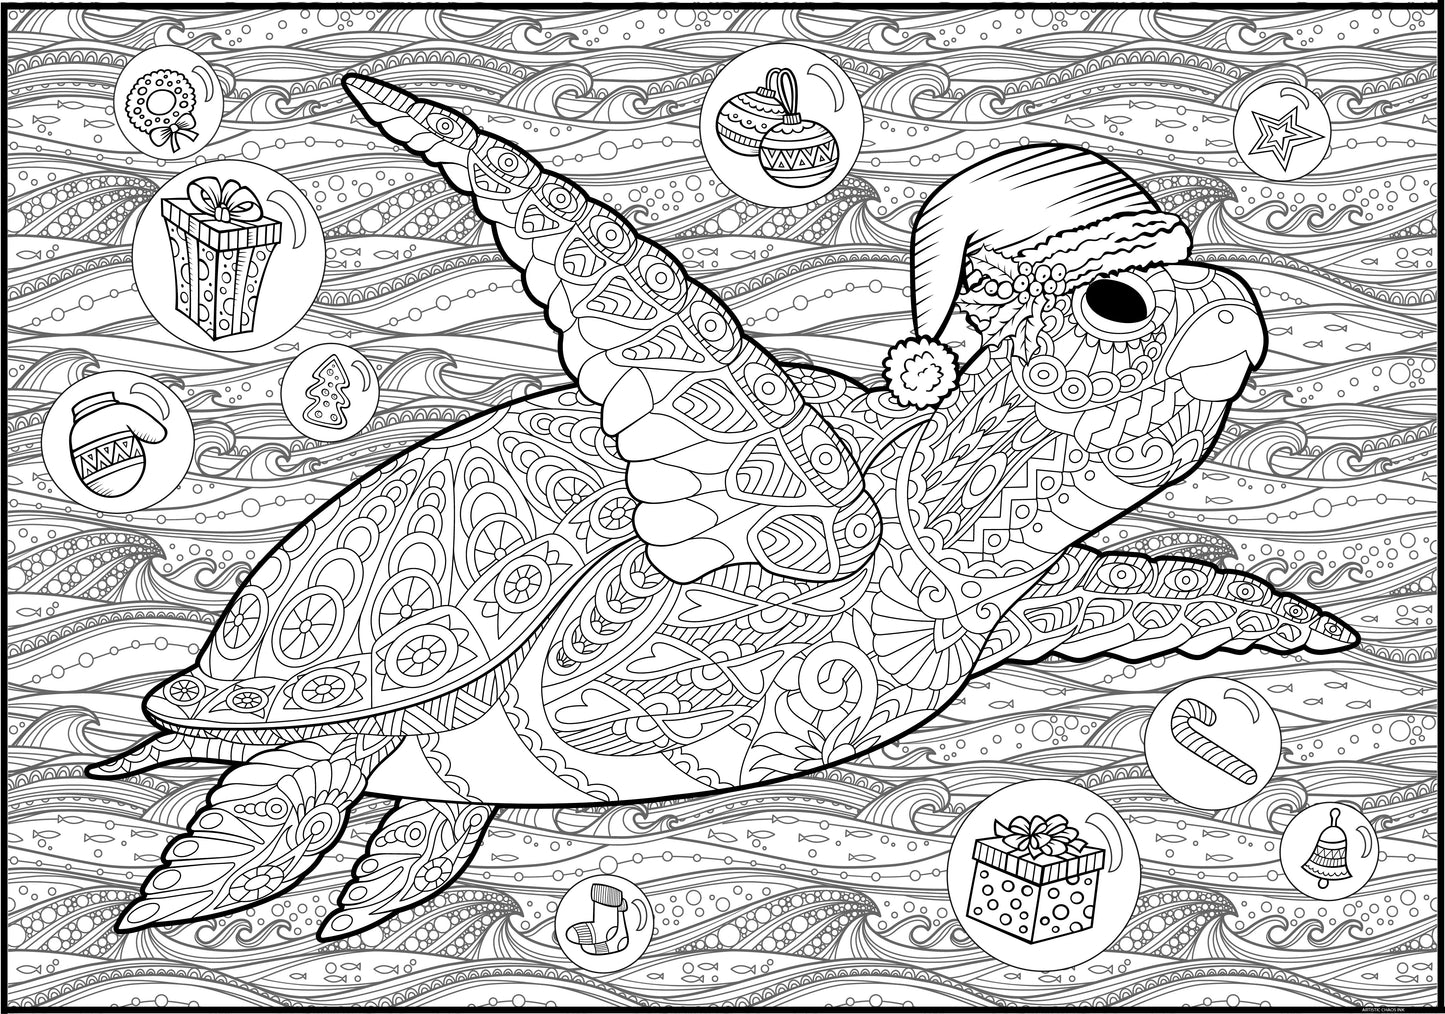 Premium Giant Christmas Turtle Coloring Poster